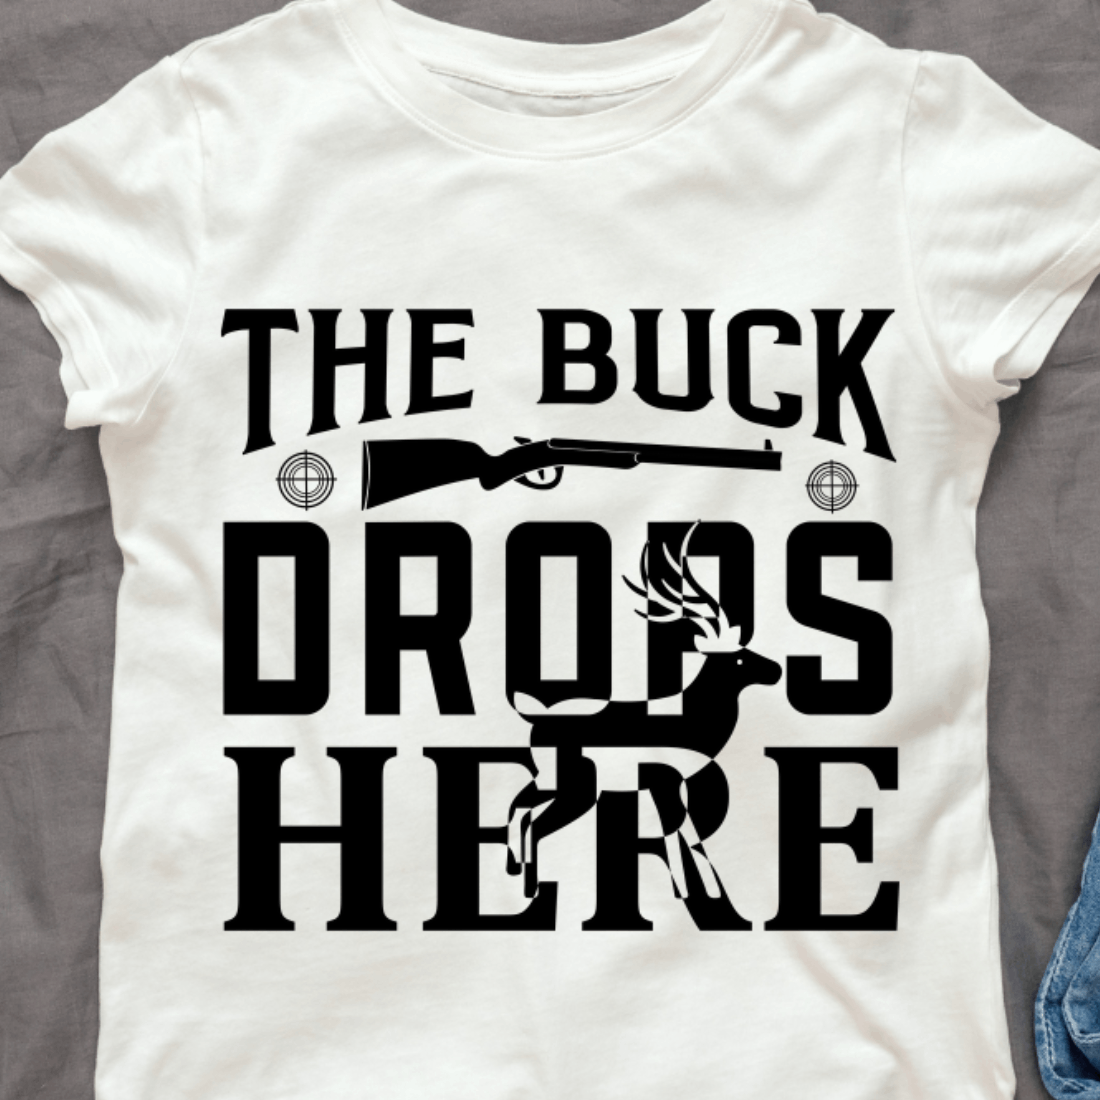 T - shirt that says the buck drops here.